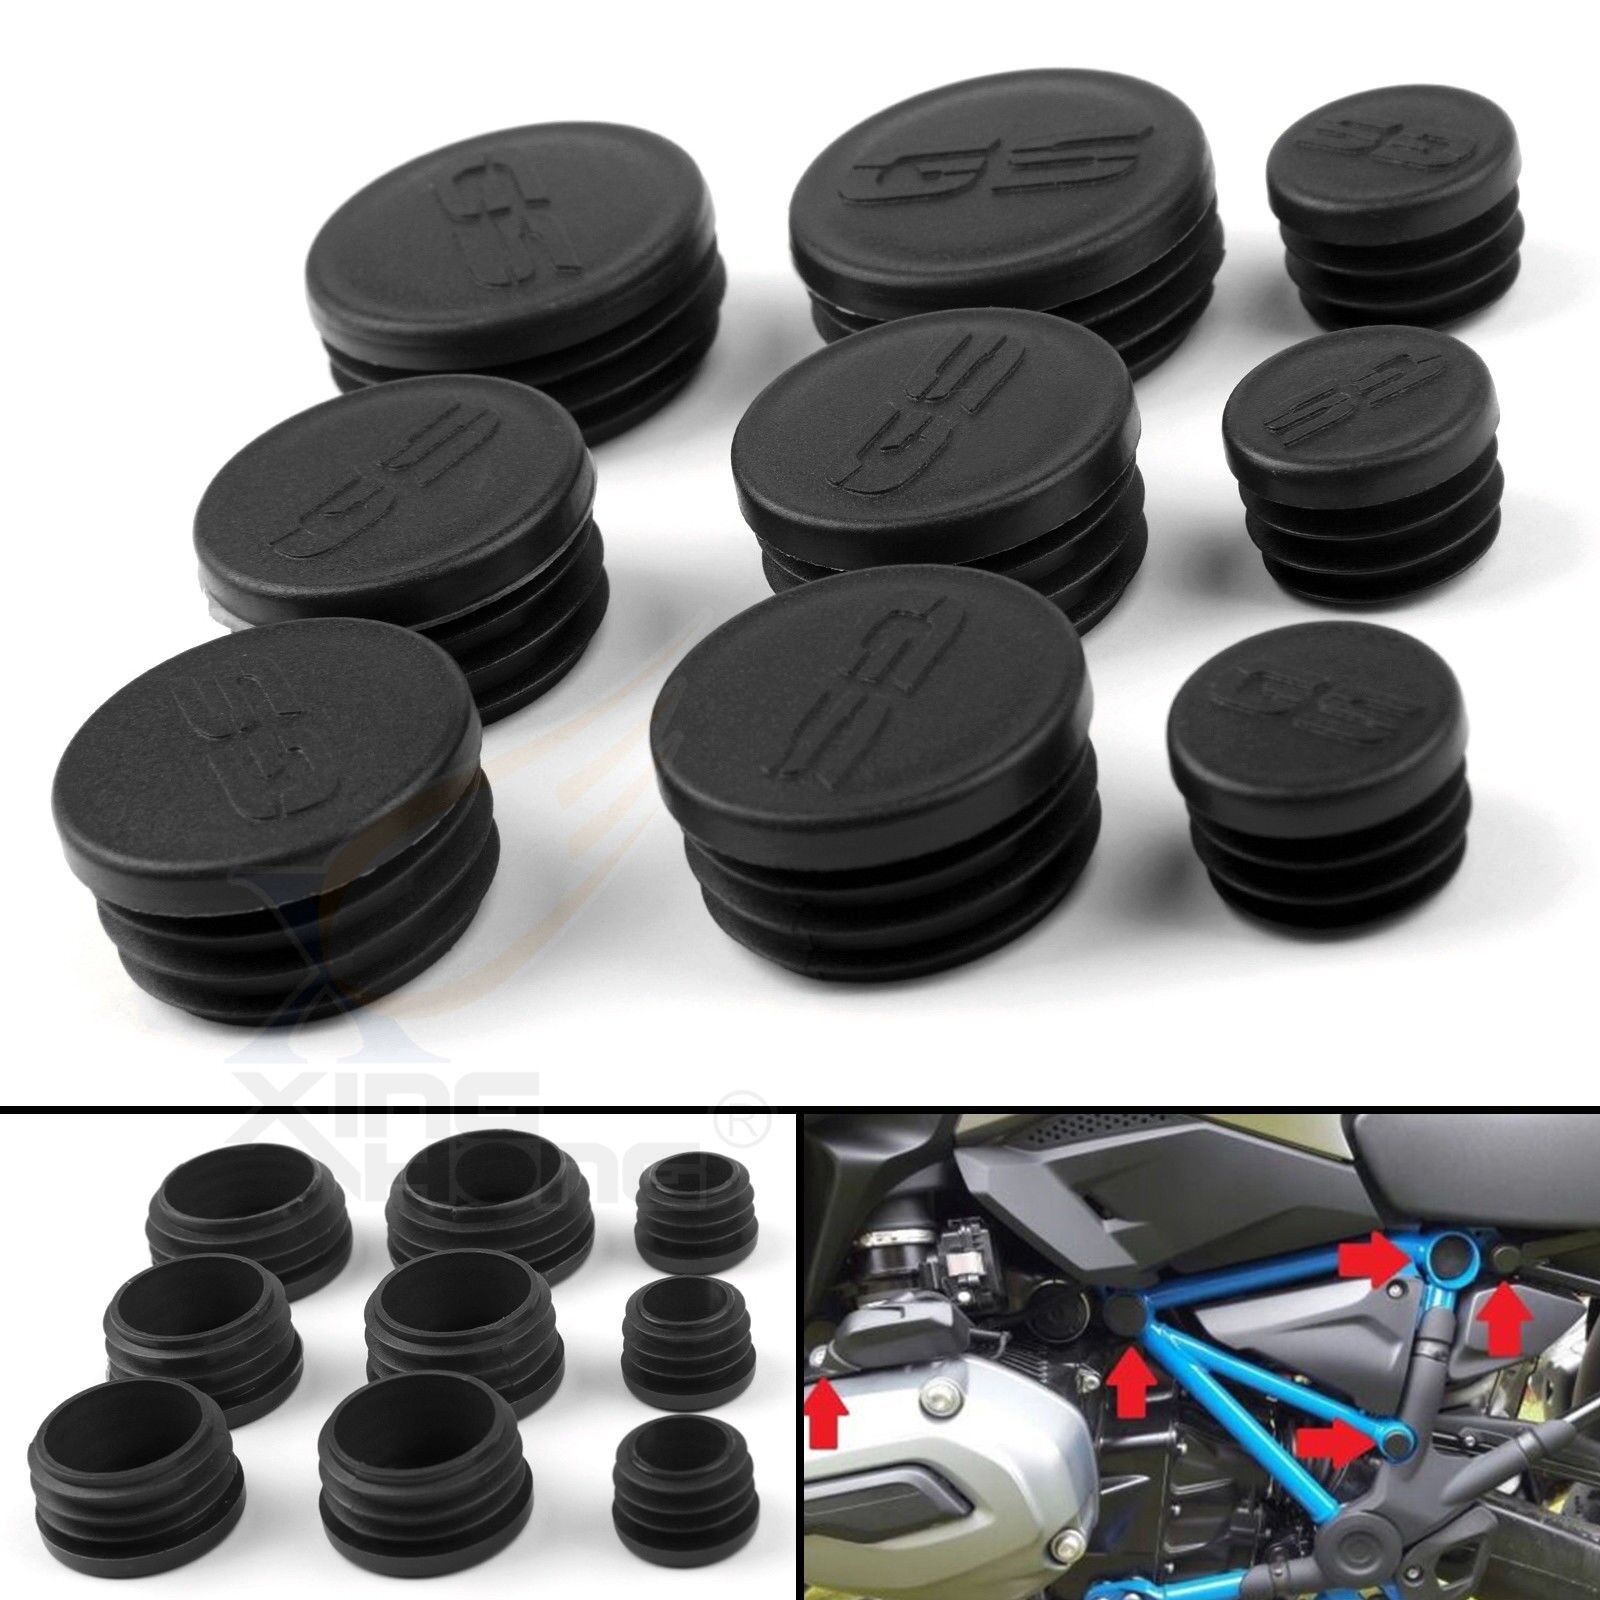 Replacement of Frame Plug Set 9 caps Bkfor BMW R 1200 GS LC 17-18